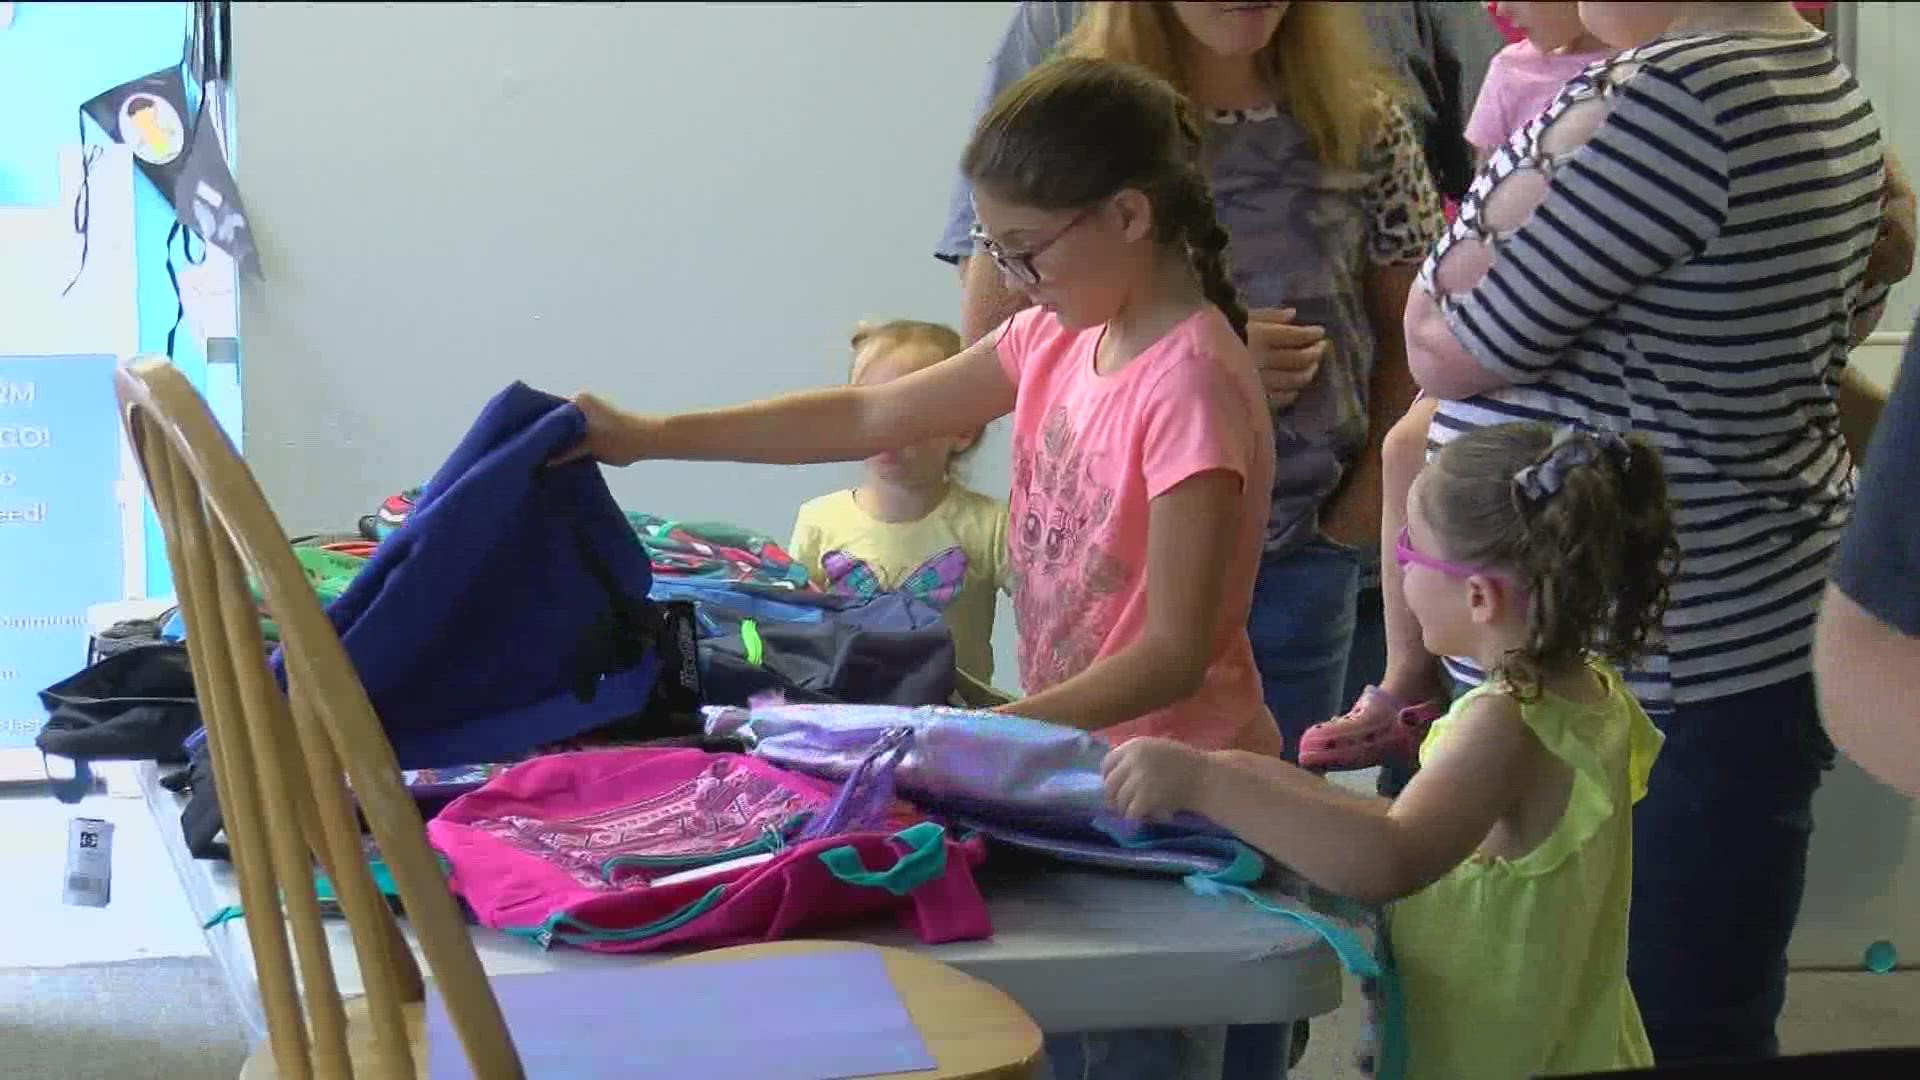 Perrysburg Schools partnered with Perrysburg Heights at their community center to provide kids with the supplies they need for the coming school year.